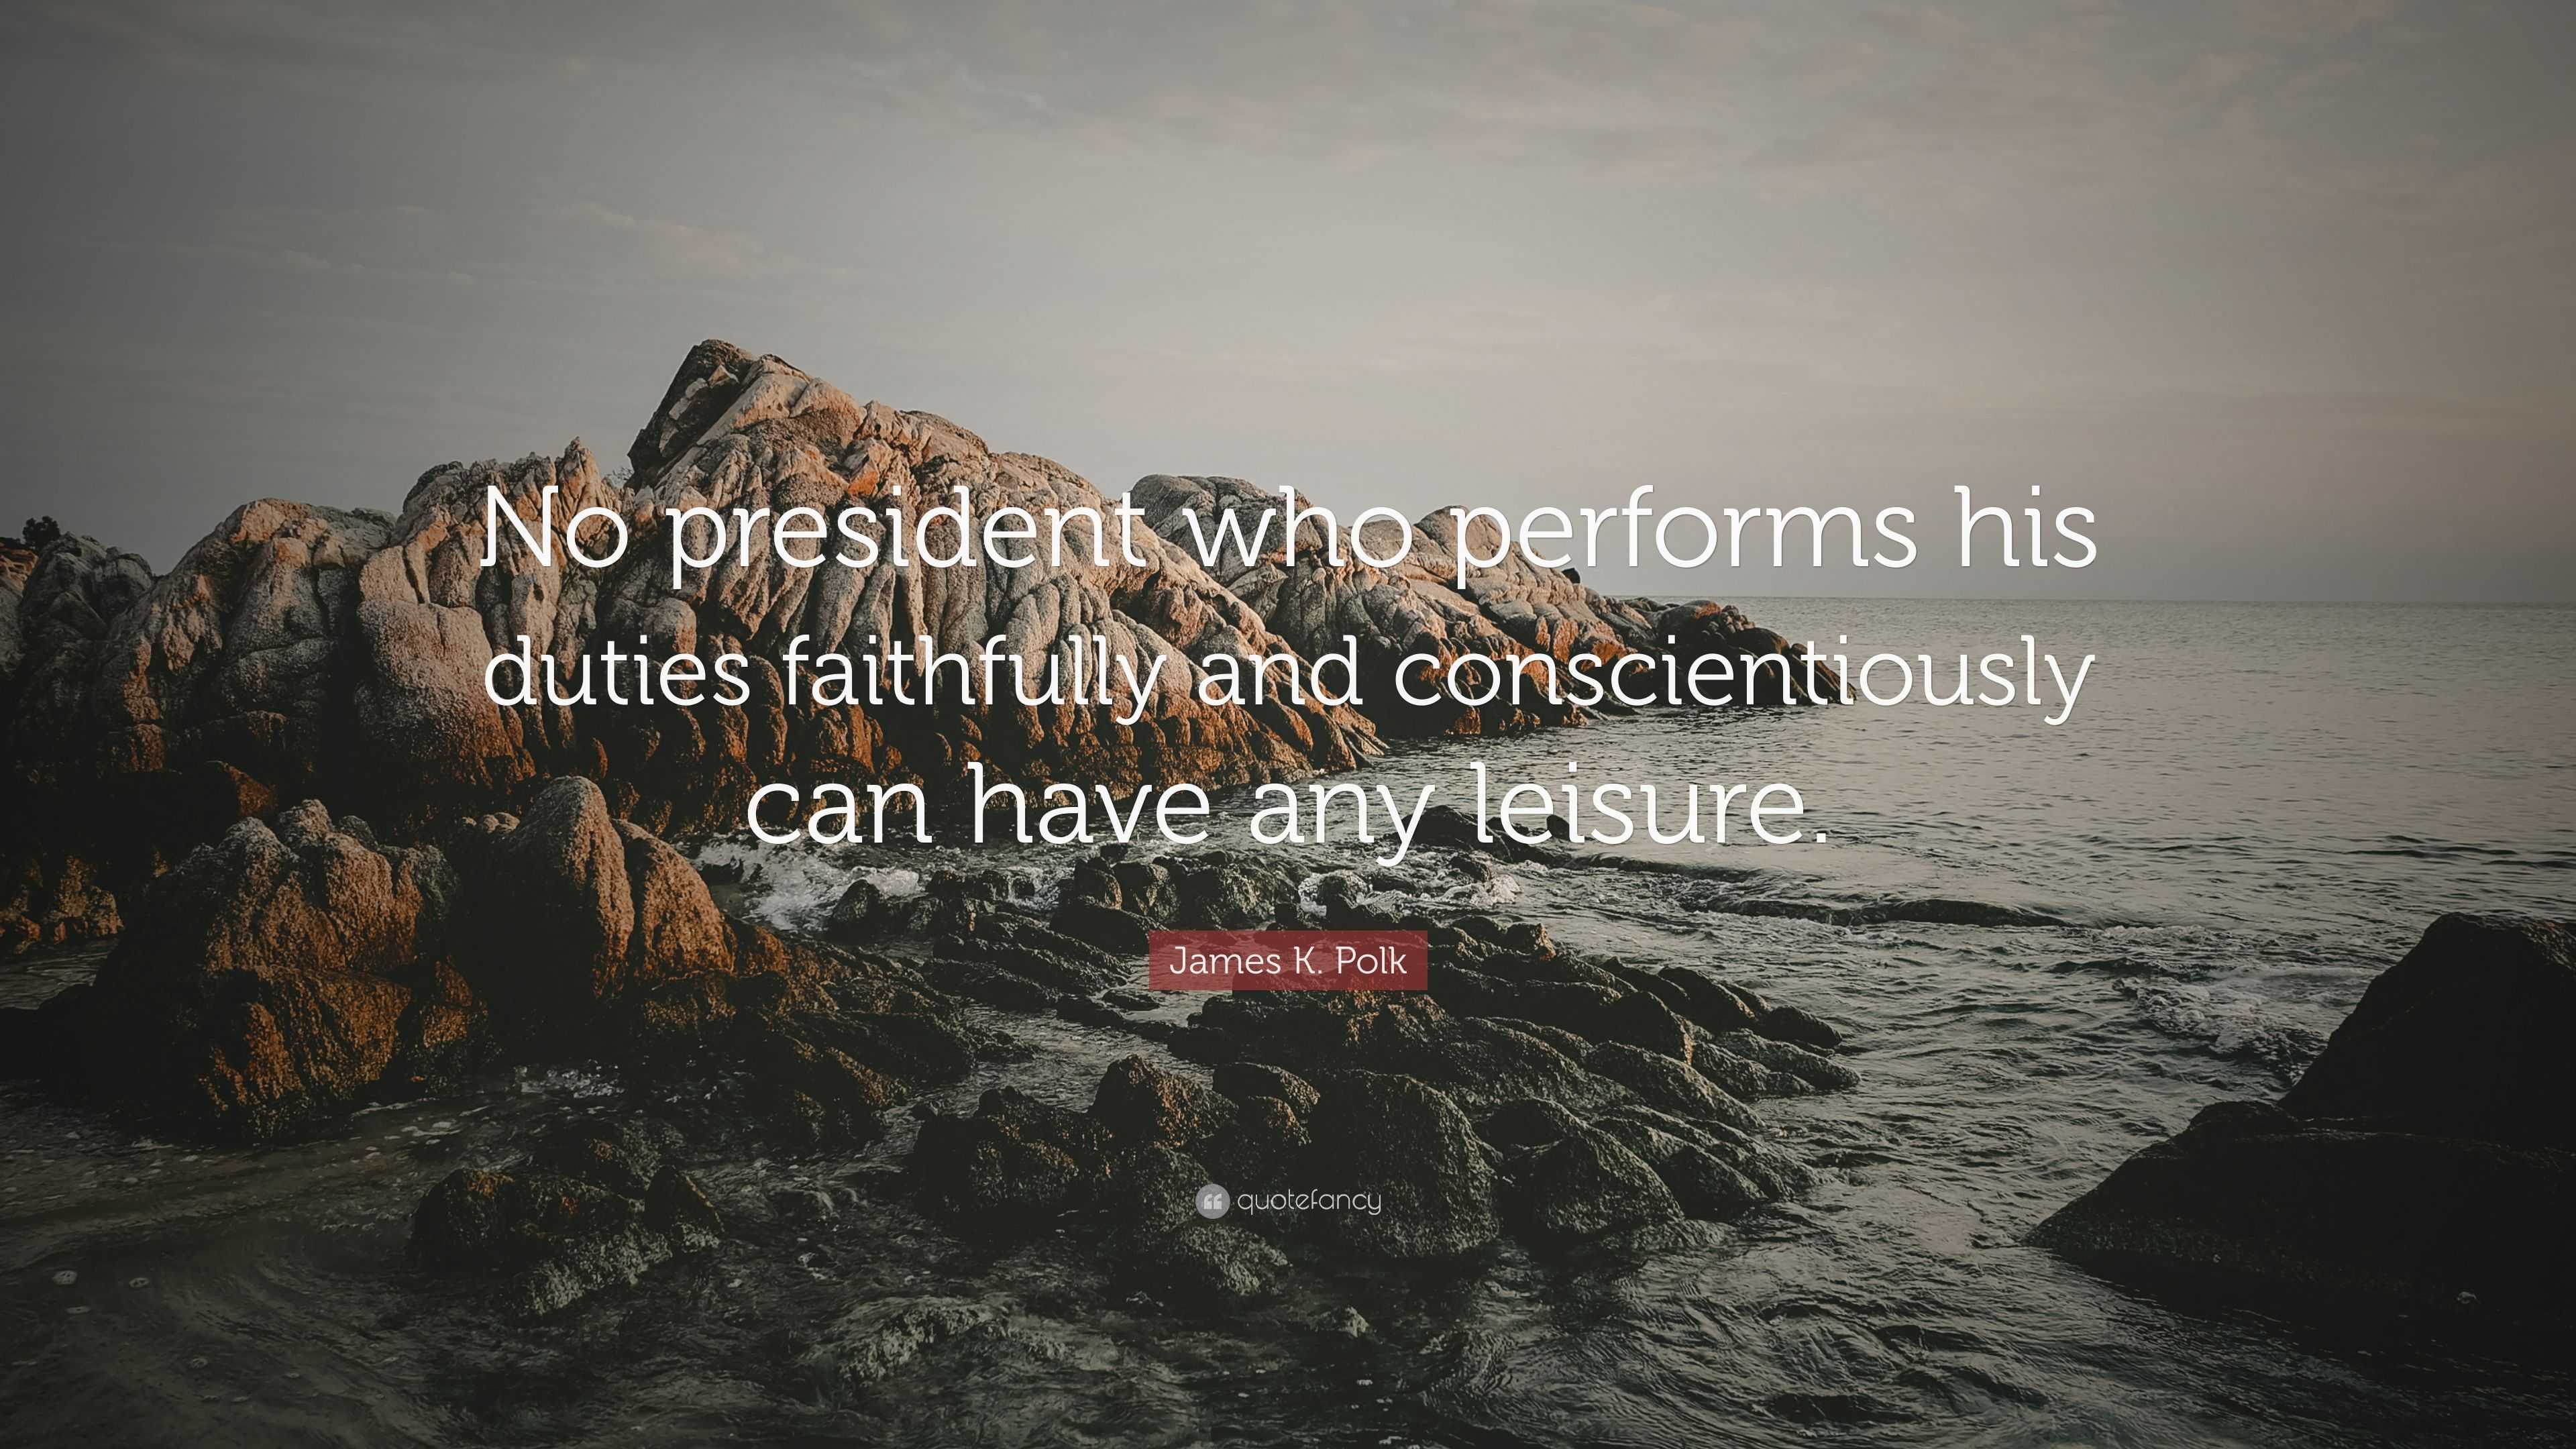 James K. Polk Quote: "No president who performs his duties faithfully and conscientiously can ...